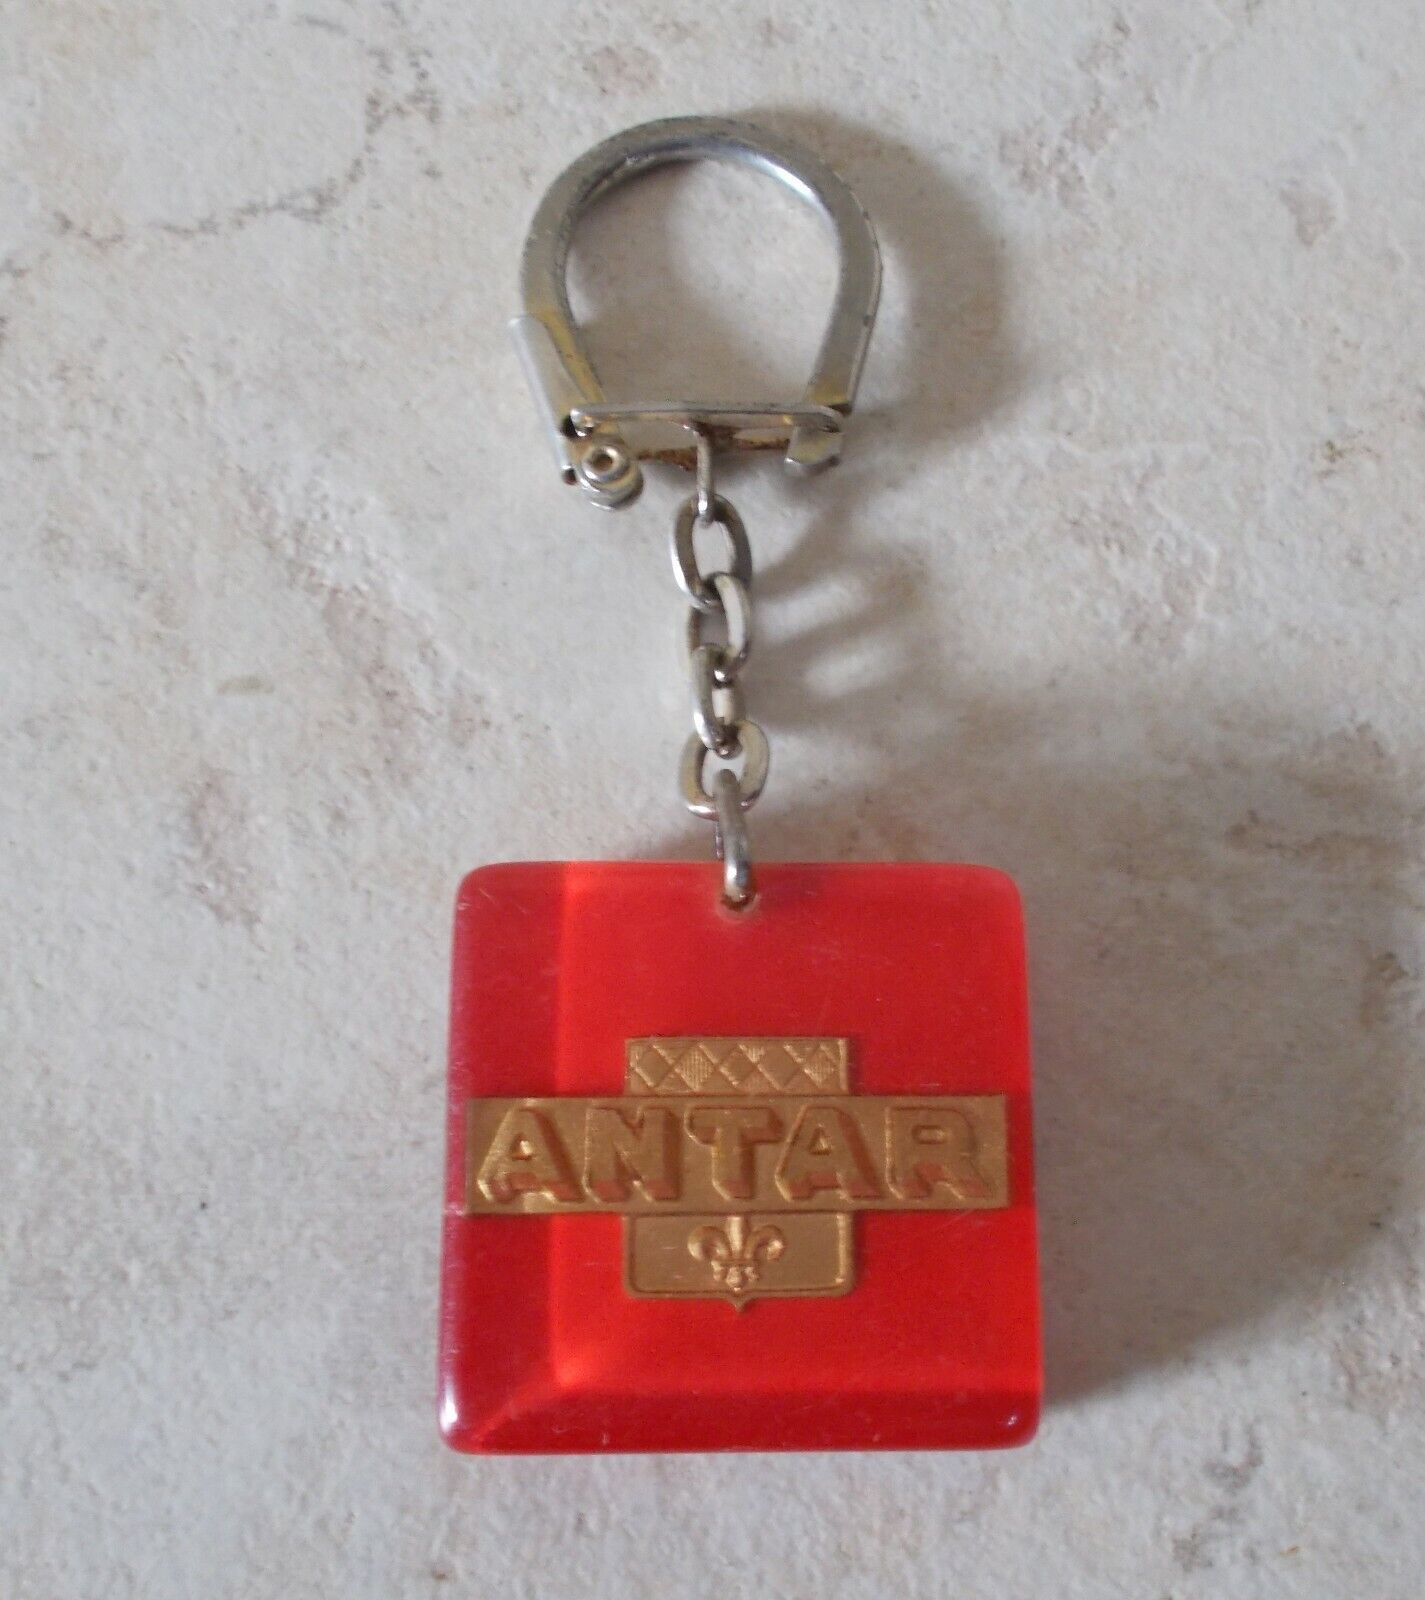 Vintage ANTAR Motor Oil Keychain key ring France french antique old 1960s #2